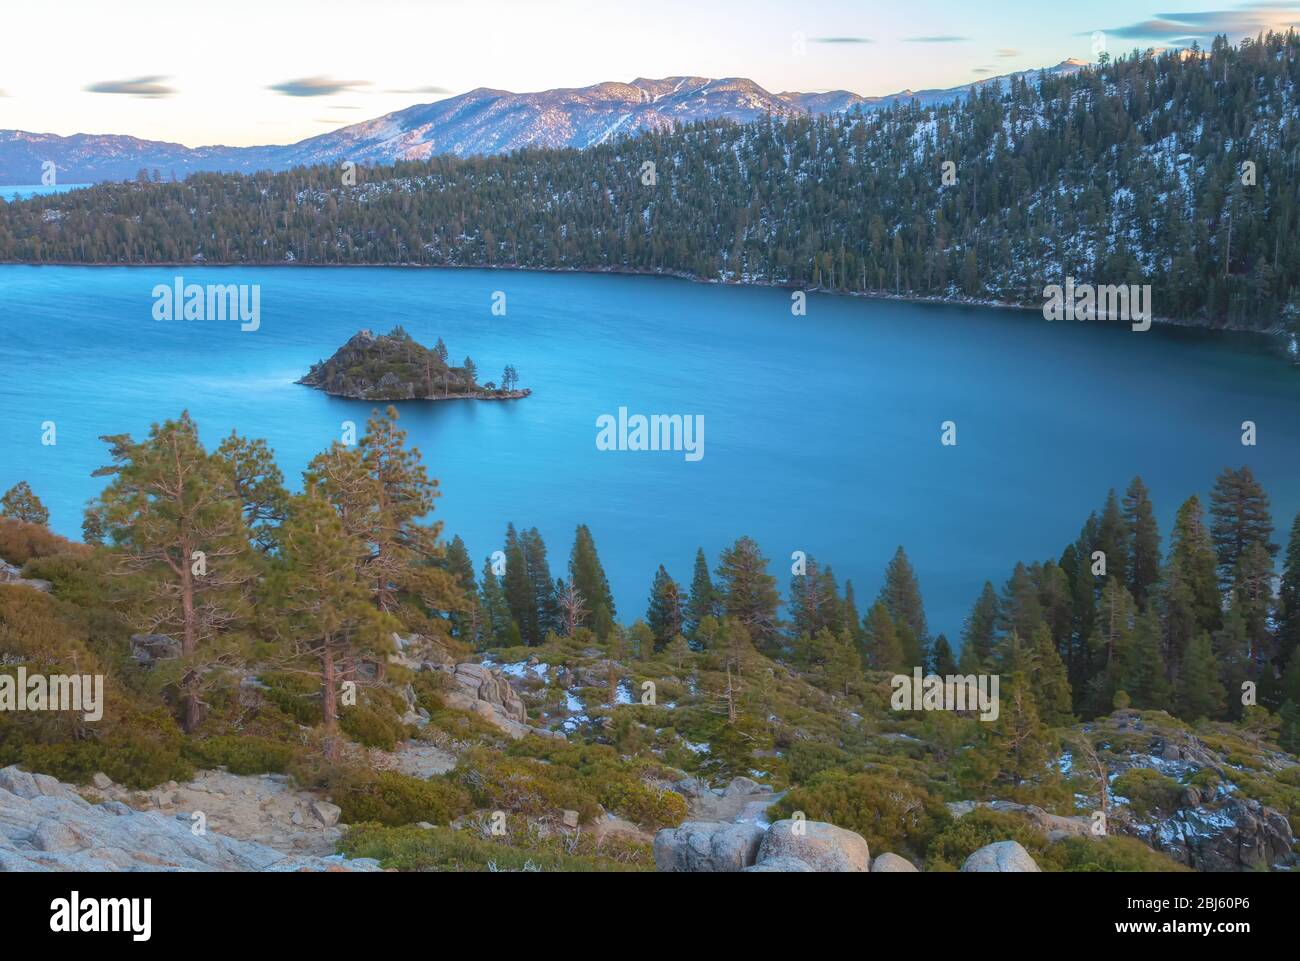 Scenic view of the Lake Tahoe's Emerald Bay, with Fannette Island, during a dry winter season, California, USA. Stock Photo